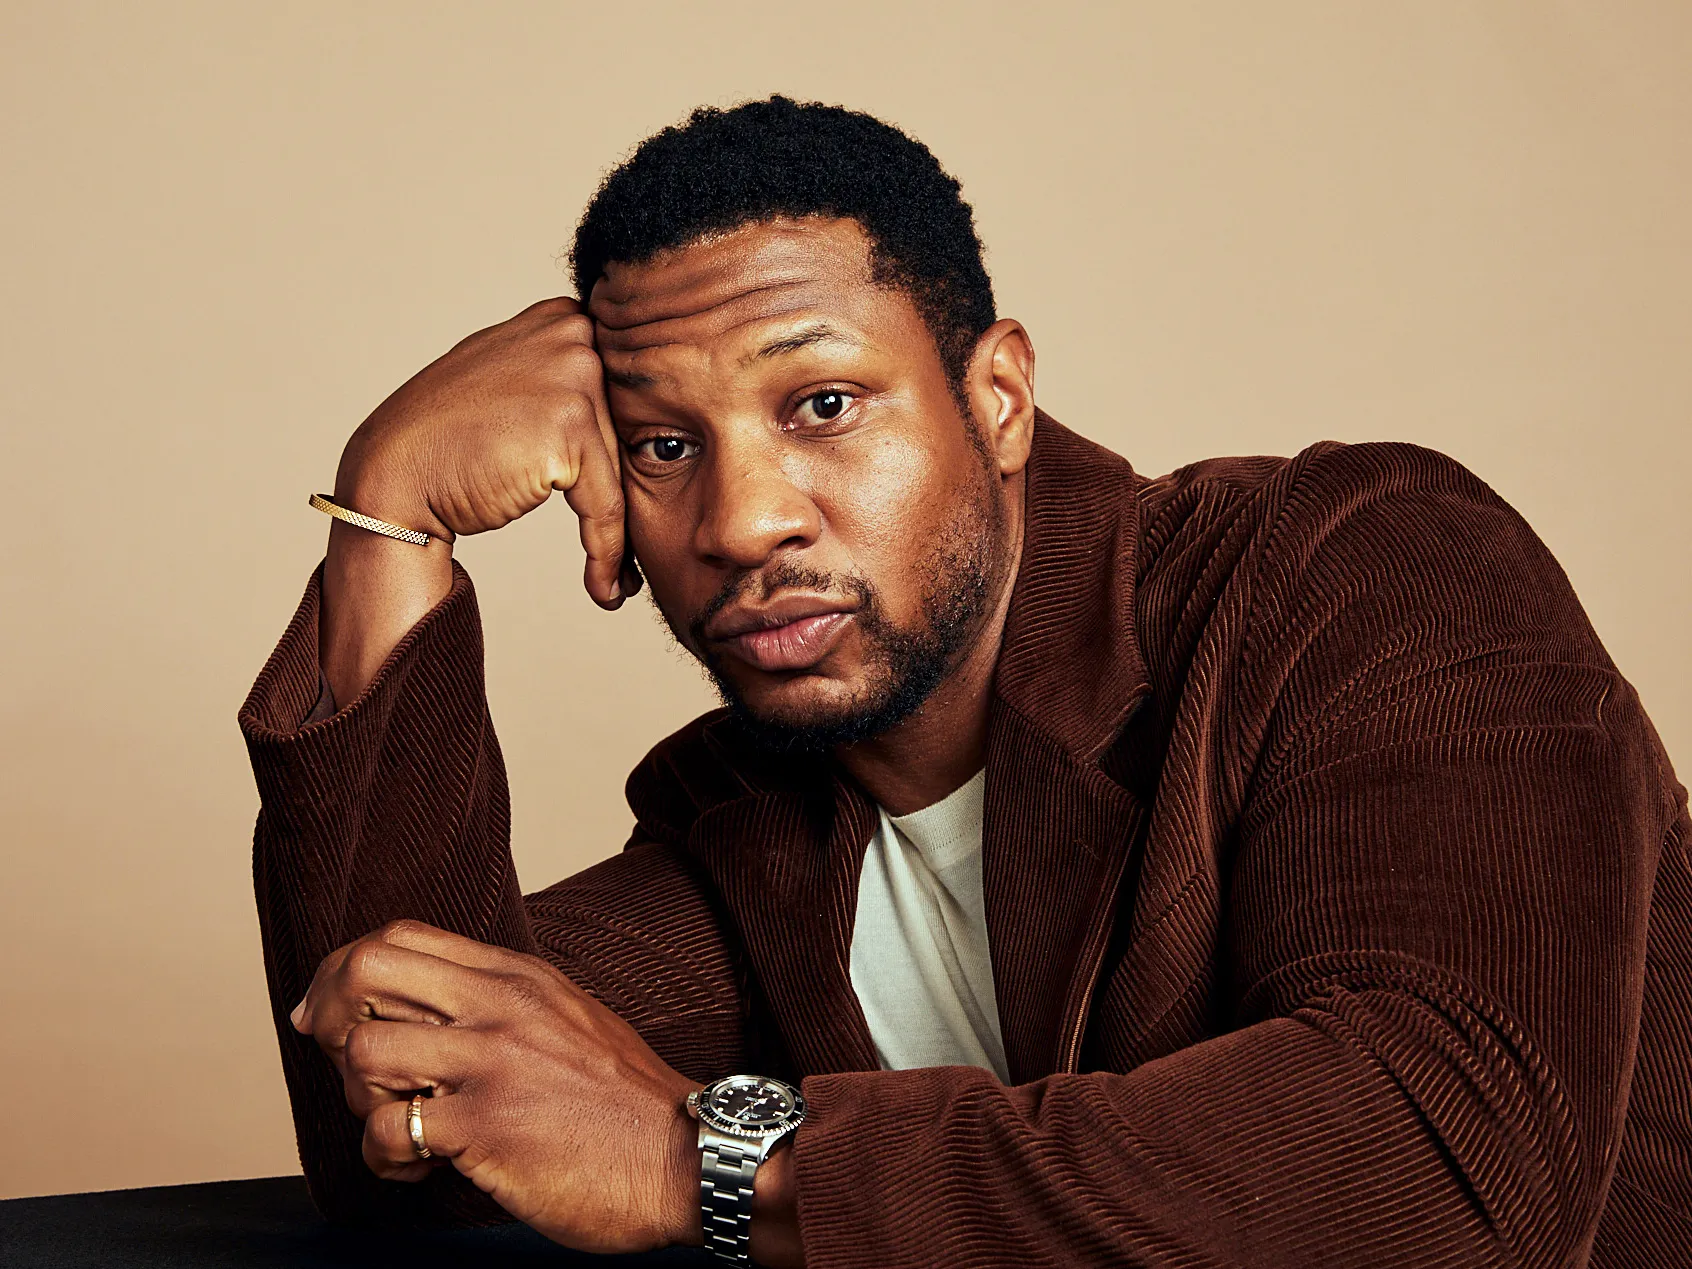 Report: CAA Parted Ways with Jonathan Majors, Pre-Arrest, for His “Brutal Conduct” Toward Staff